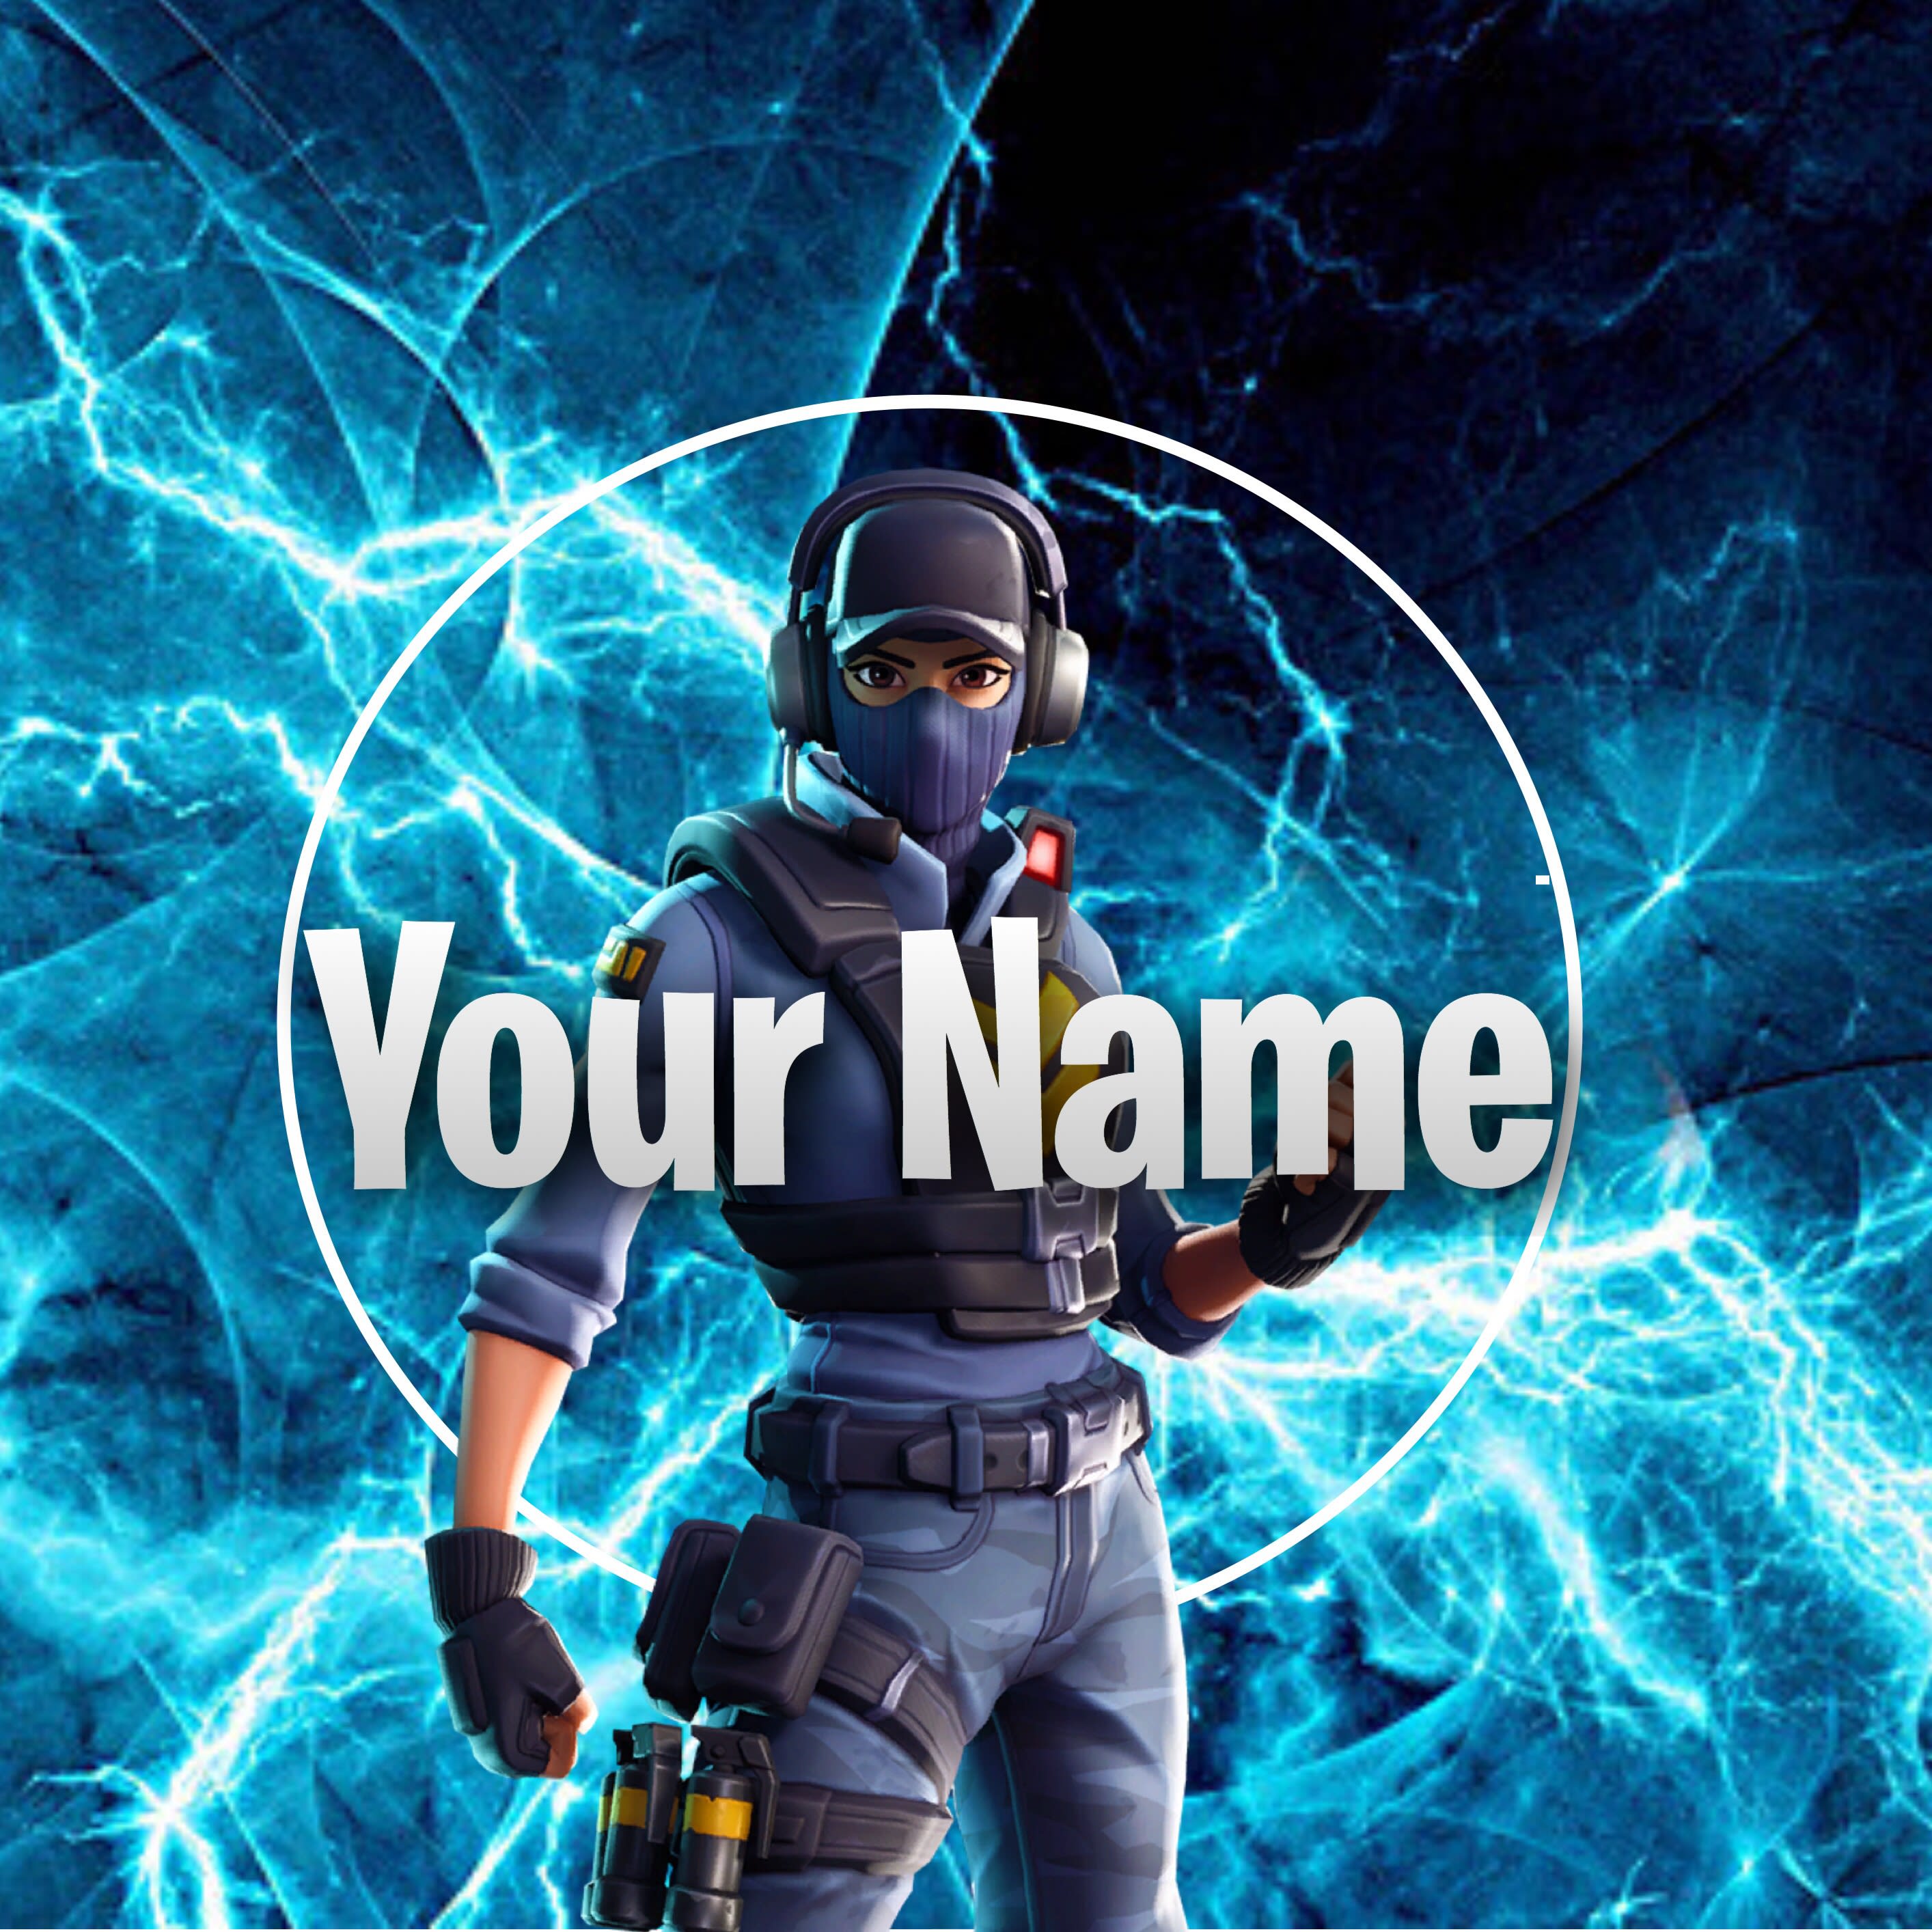 Cool Fortnite Profil Pic Maker Create A Fortnite Inspired Logo With A Skin Of Your Choice By Flipsta Tbg Yt Fiverr